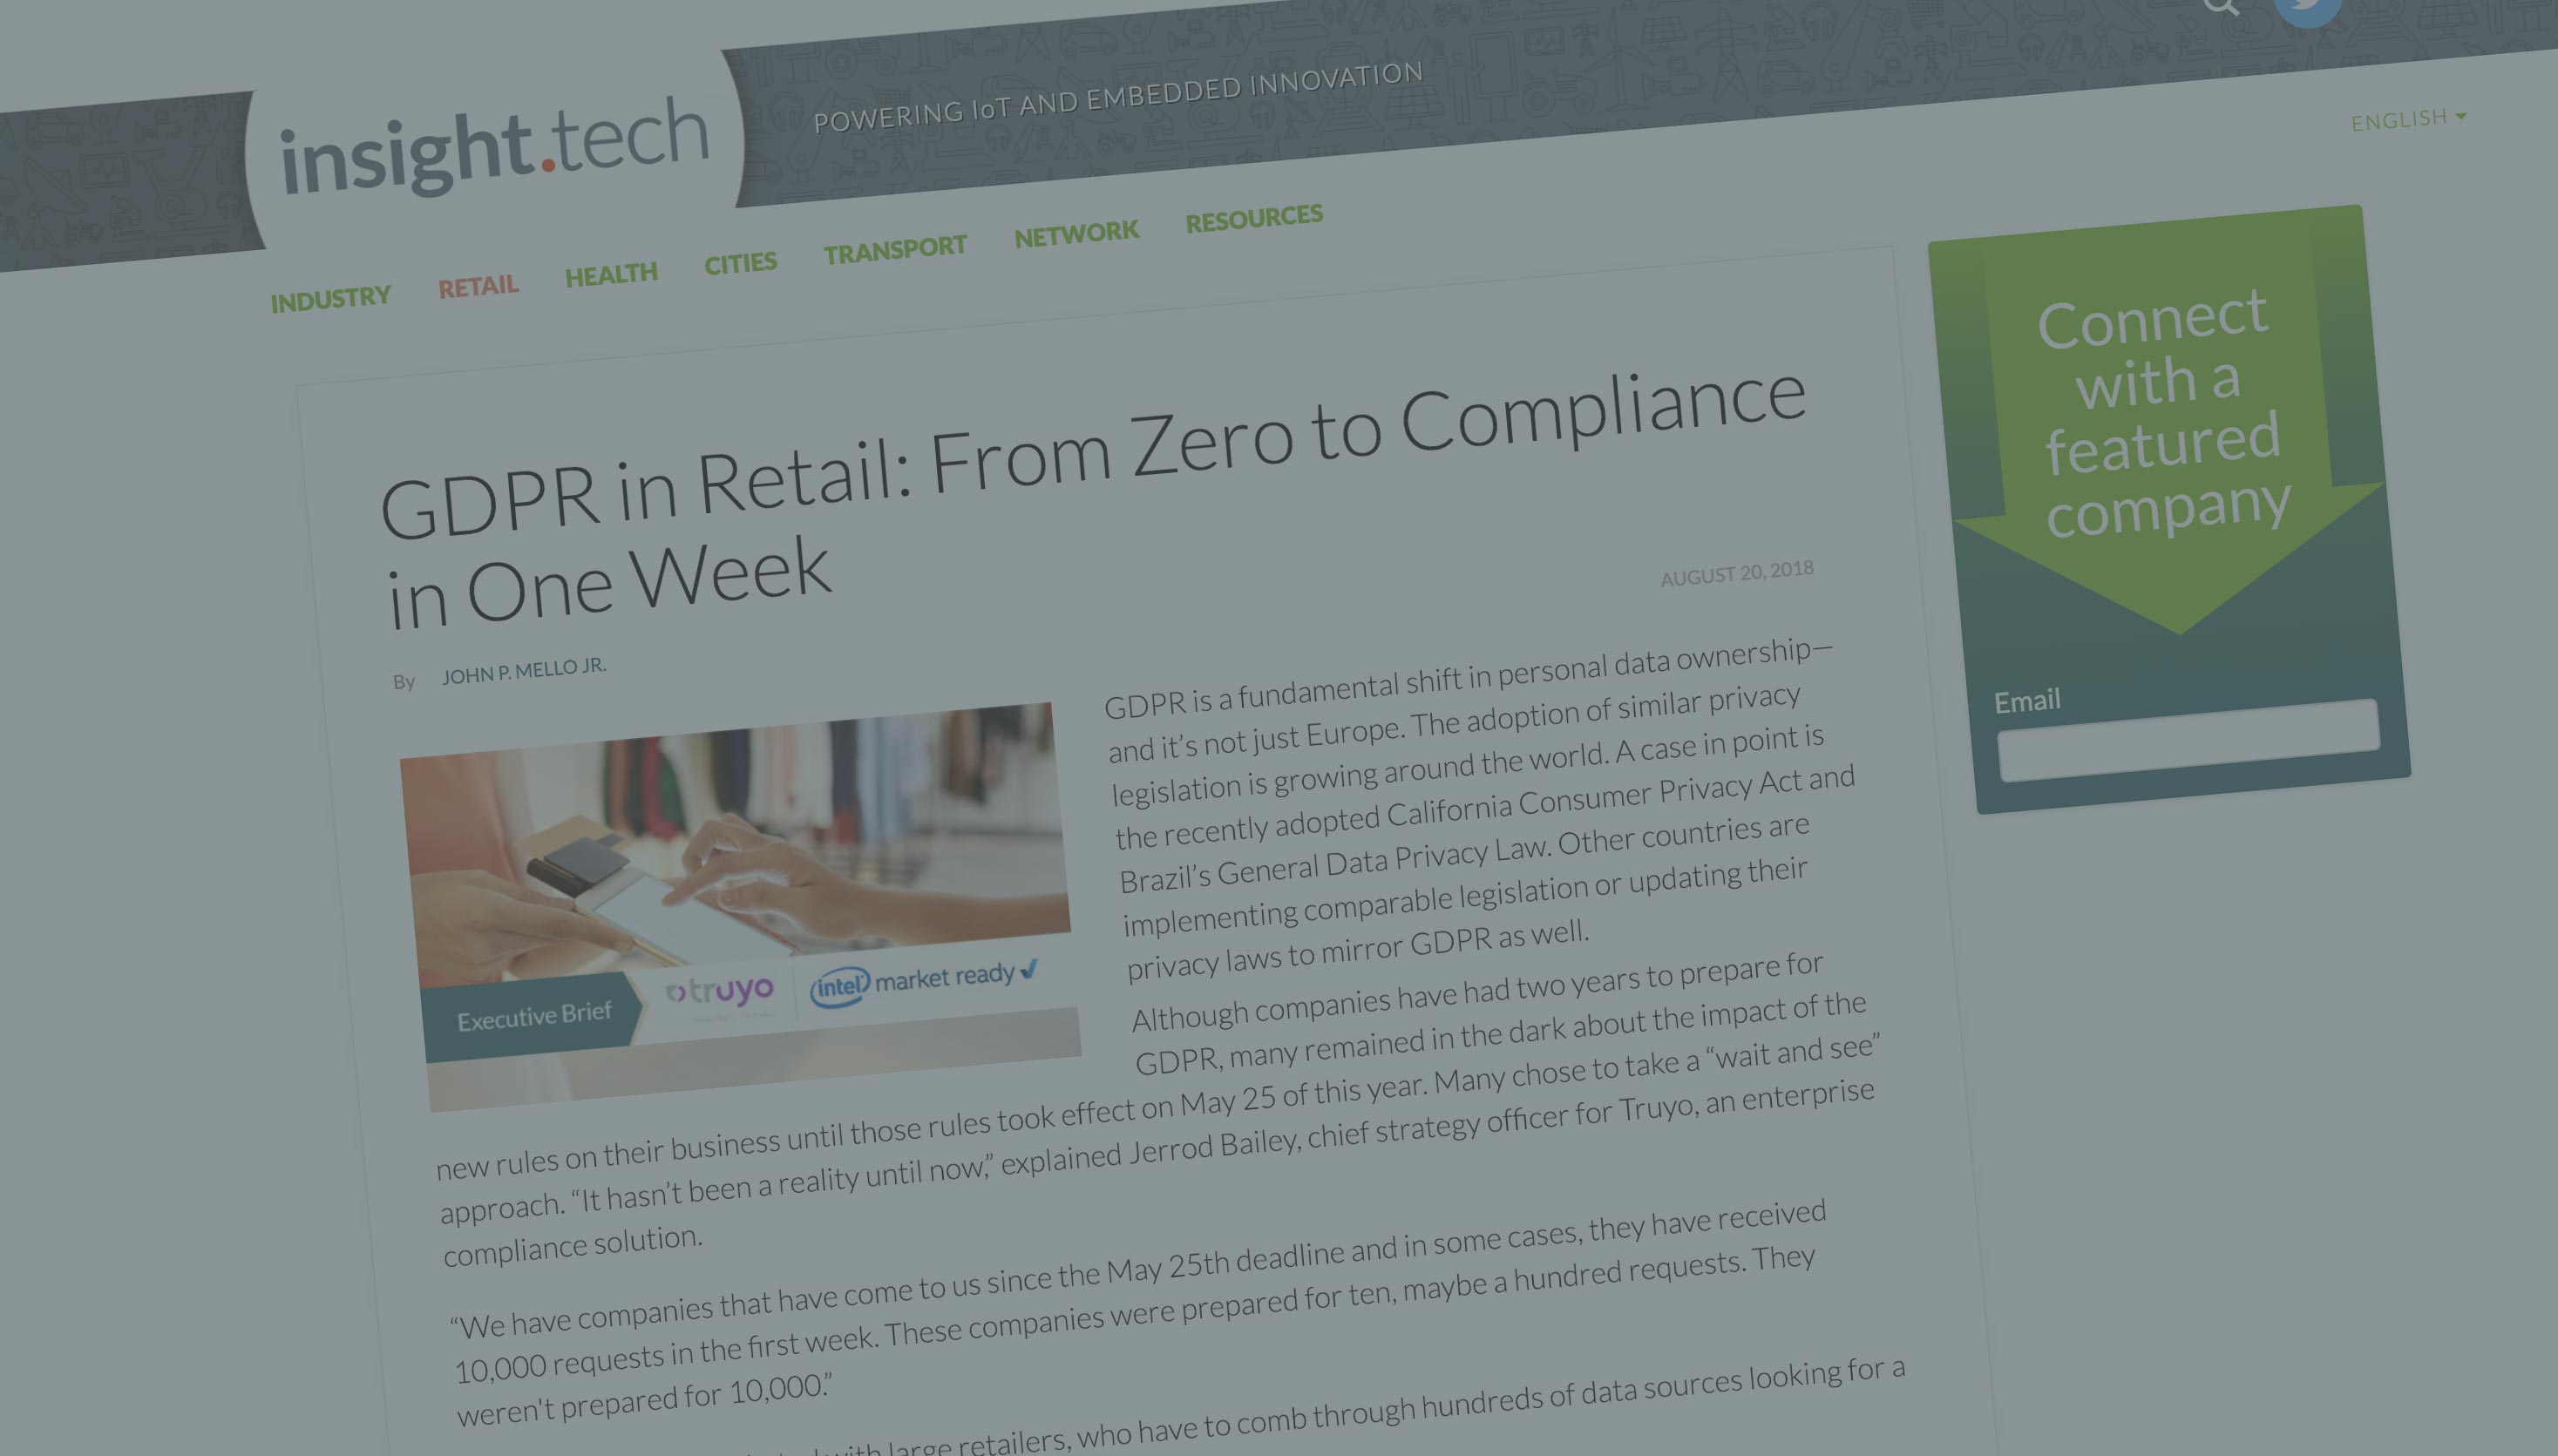 GDPR in Retail: From Zero to Compliance in One Week